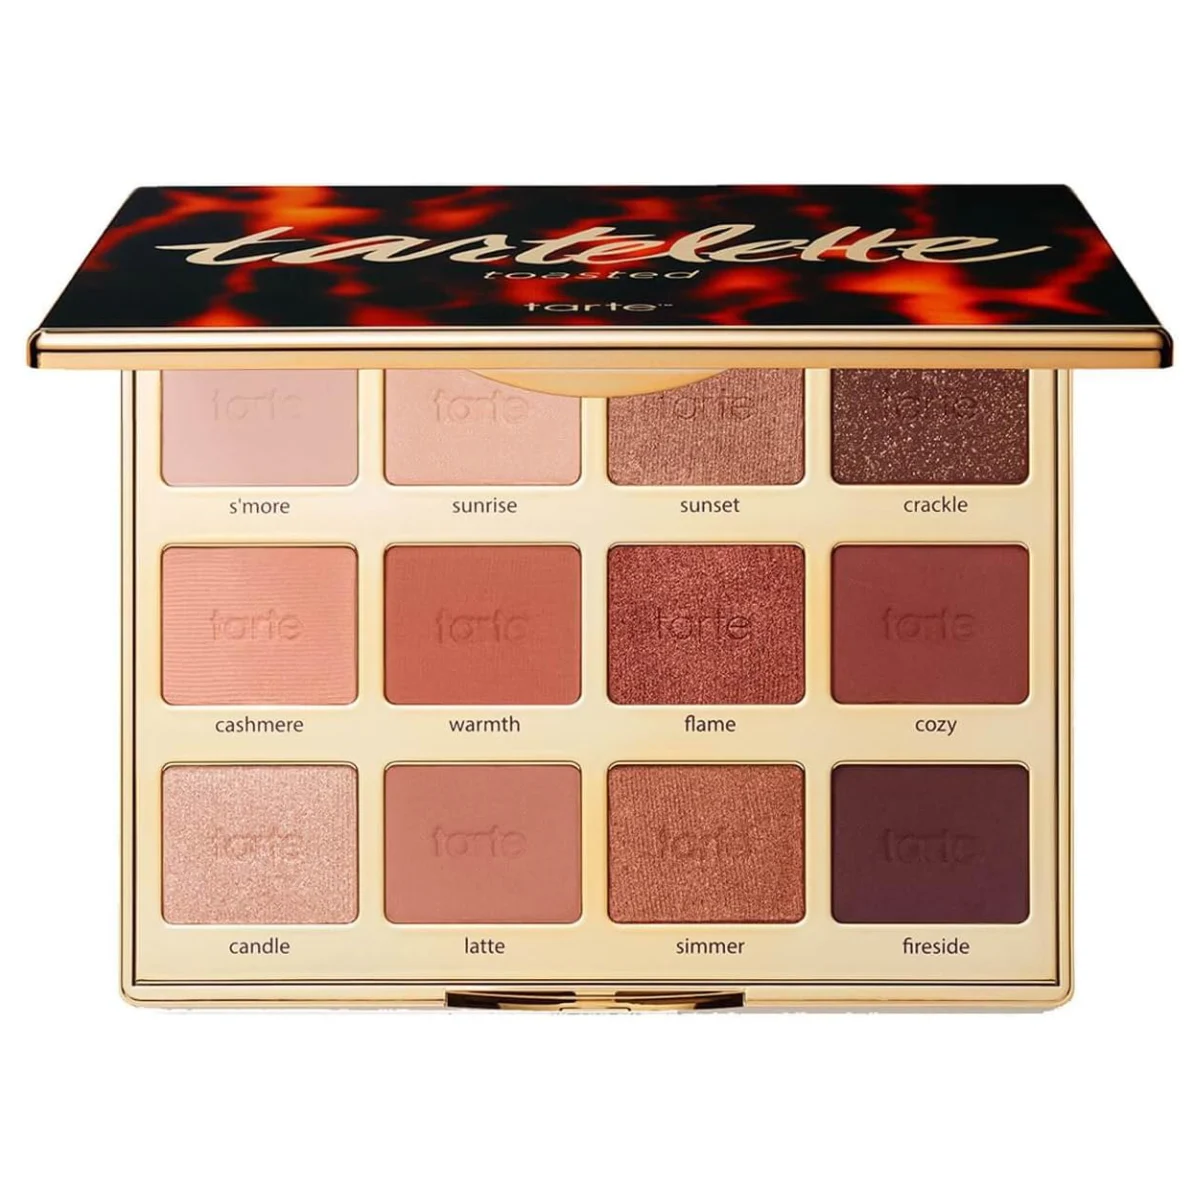 Open Tartelette Toasted Eyeshadow Palette against a white background, showcasing warm shades from creamy beige to deep terracotta.